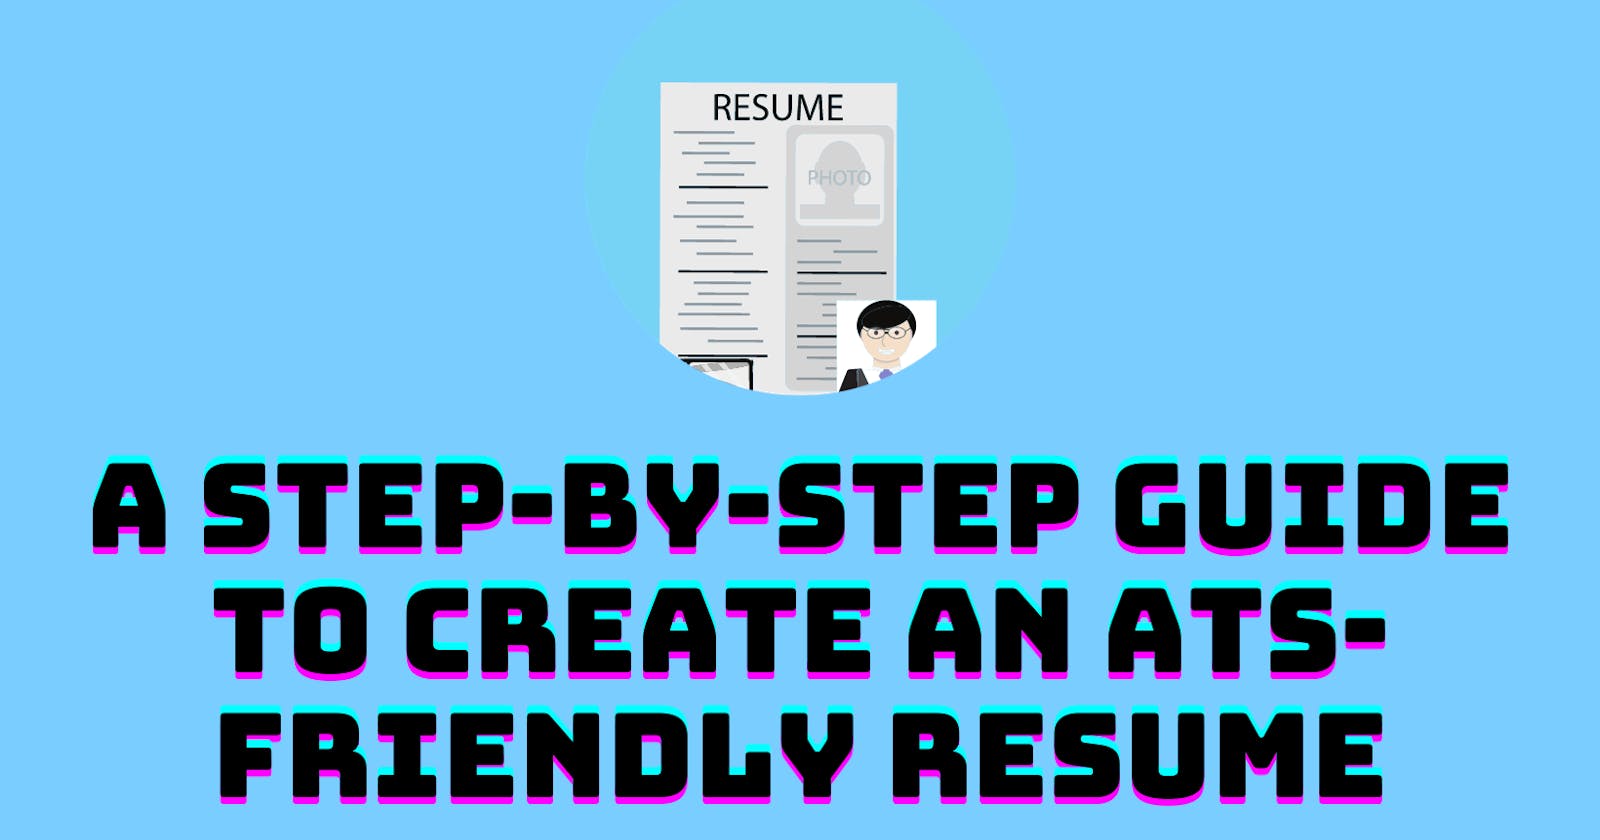 A Step-By-Step Guide to Create an ATS-Friendly Resume 📝